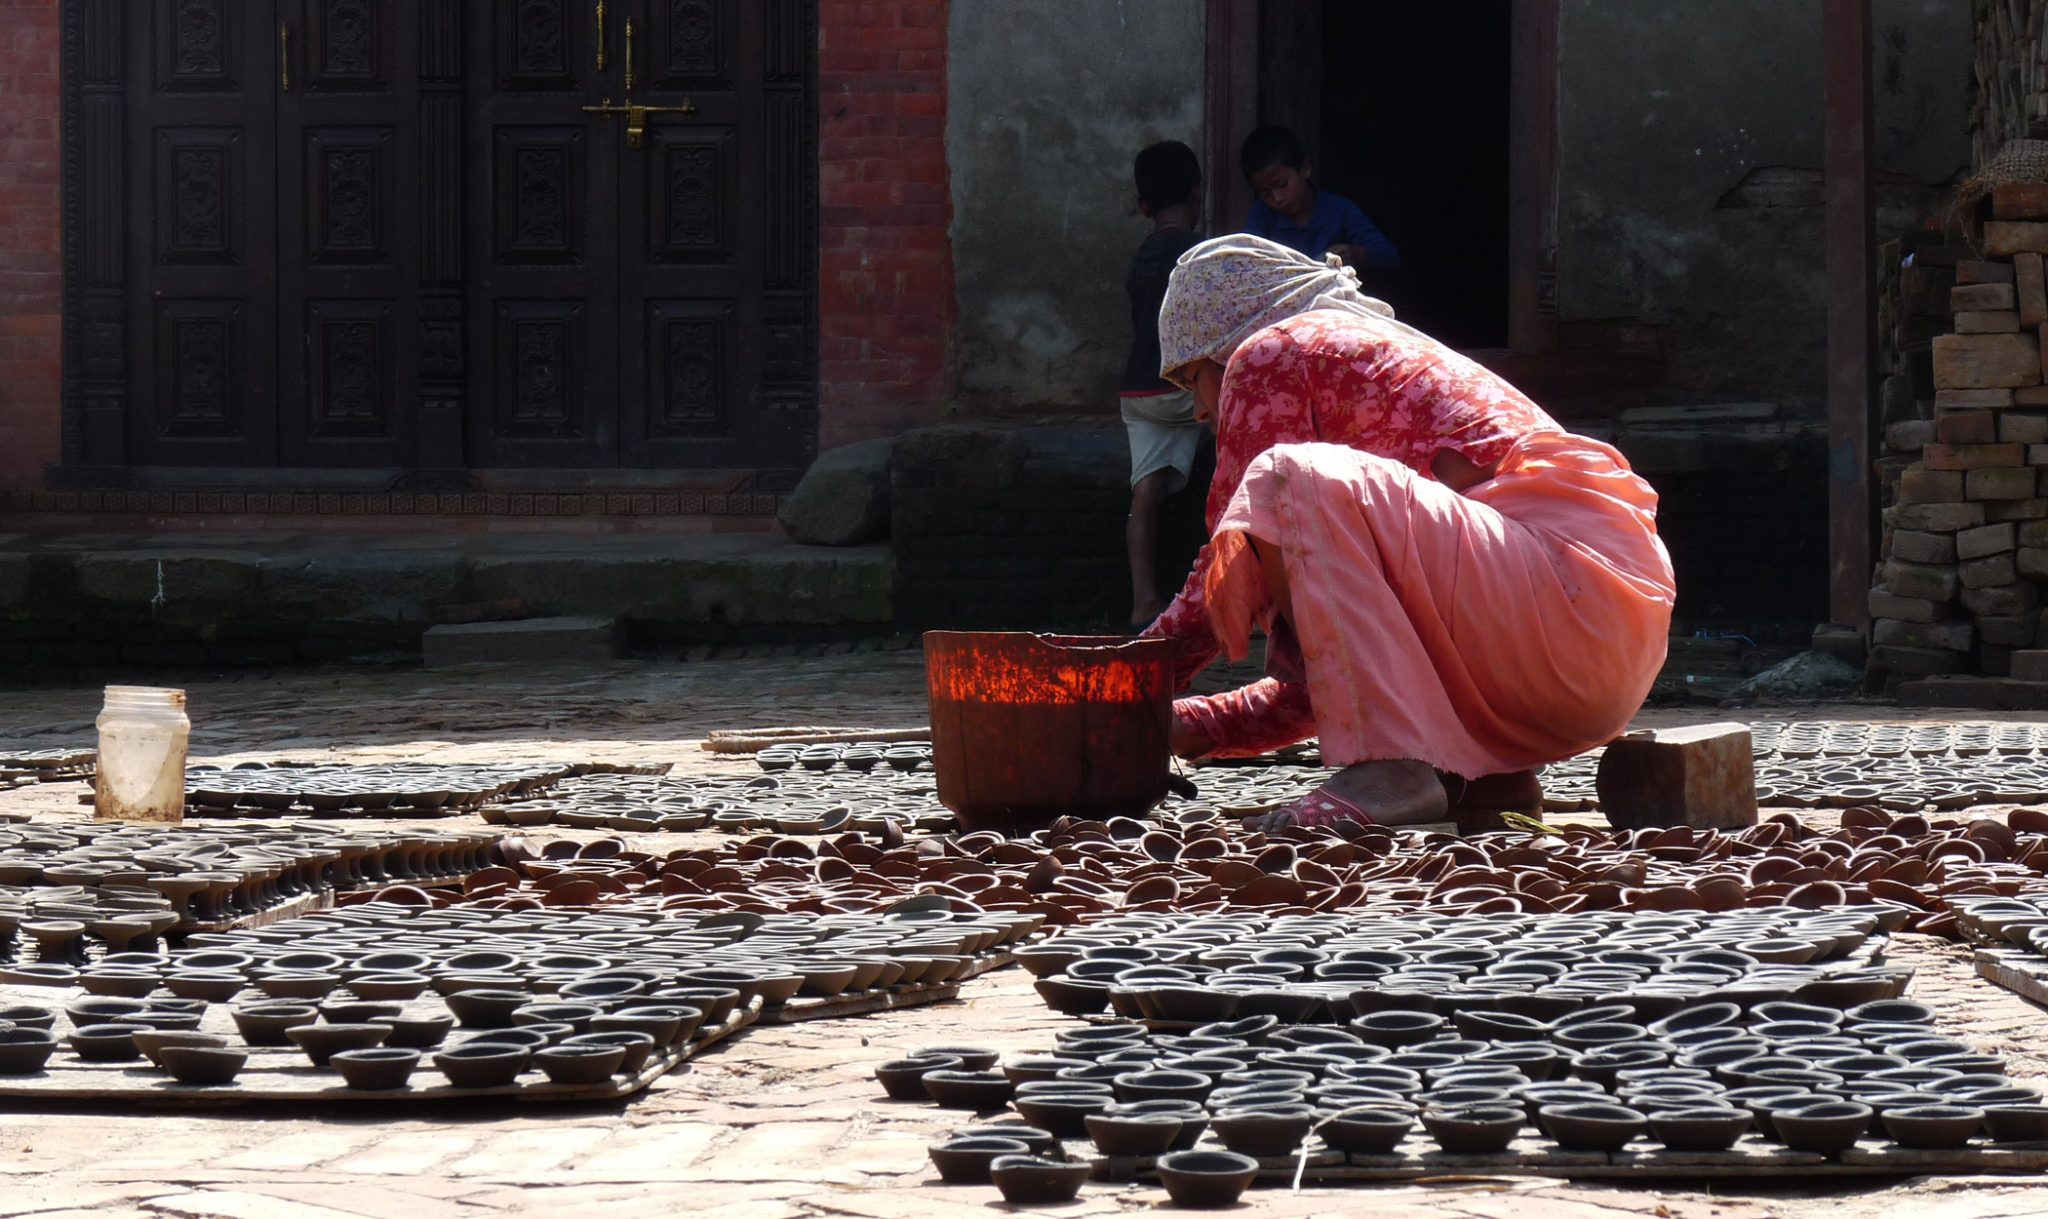 Bhaktapur is famous for its traditional pottery industry, and is home to two “pottery squares” where rows of clay pots can be seen drying in the sun. The potters are particularly busy during the Tihar festival of lights - one of the biggest festivals in Nepal - making diyekos (earthen lamps) which are then filled with oil and lit outside each household. In Hinduism, fire is an important symbol of cleansing and purification and its light dispels gloom and darkness. 